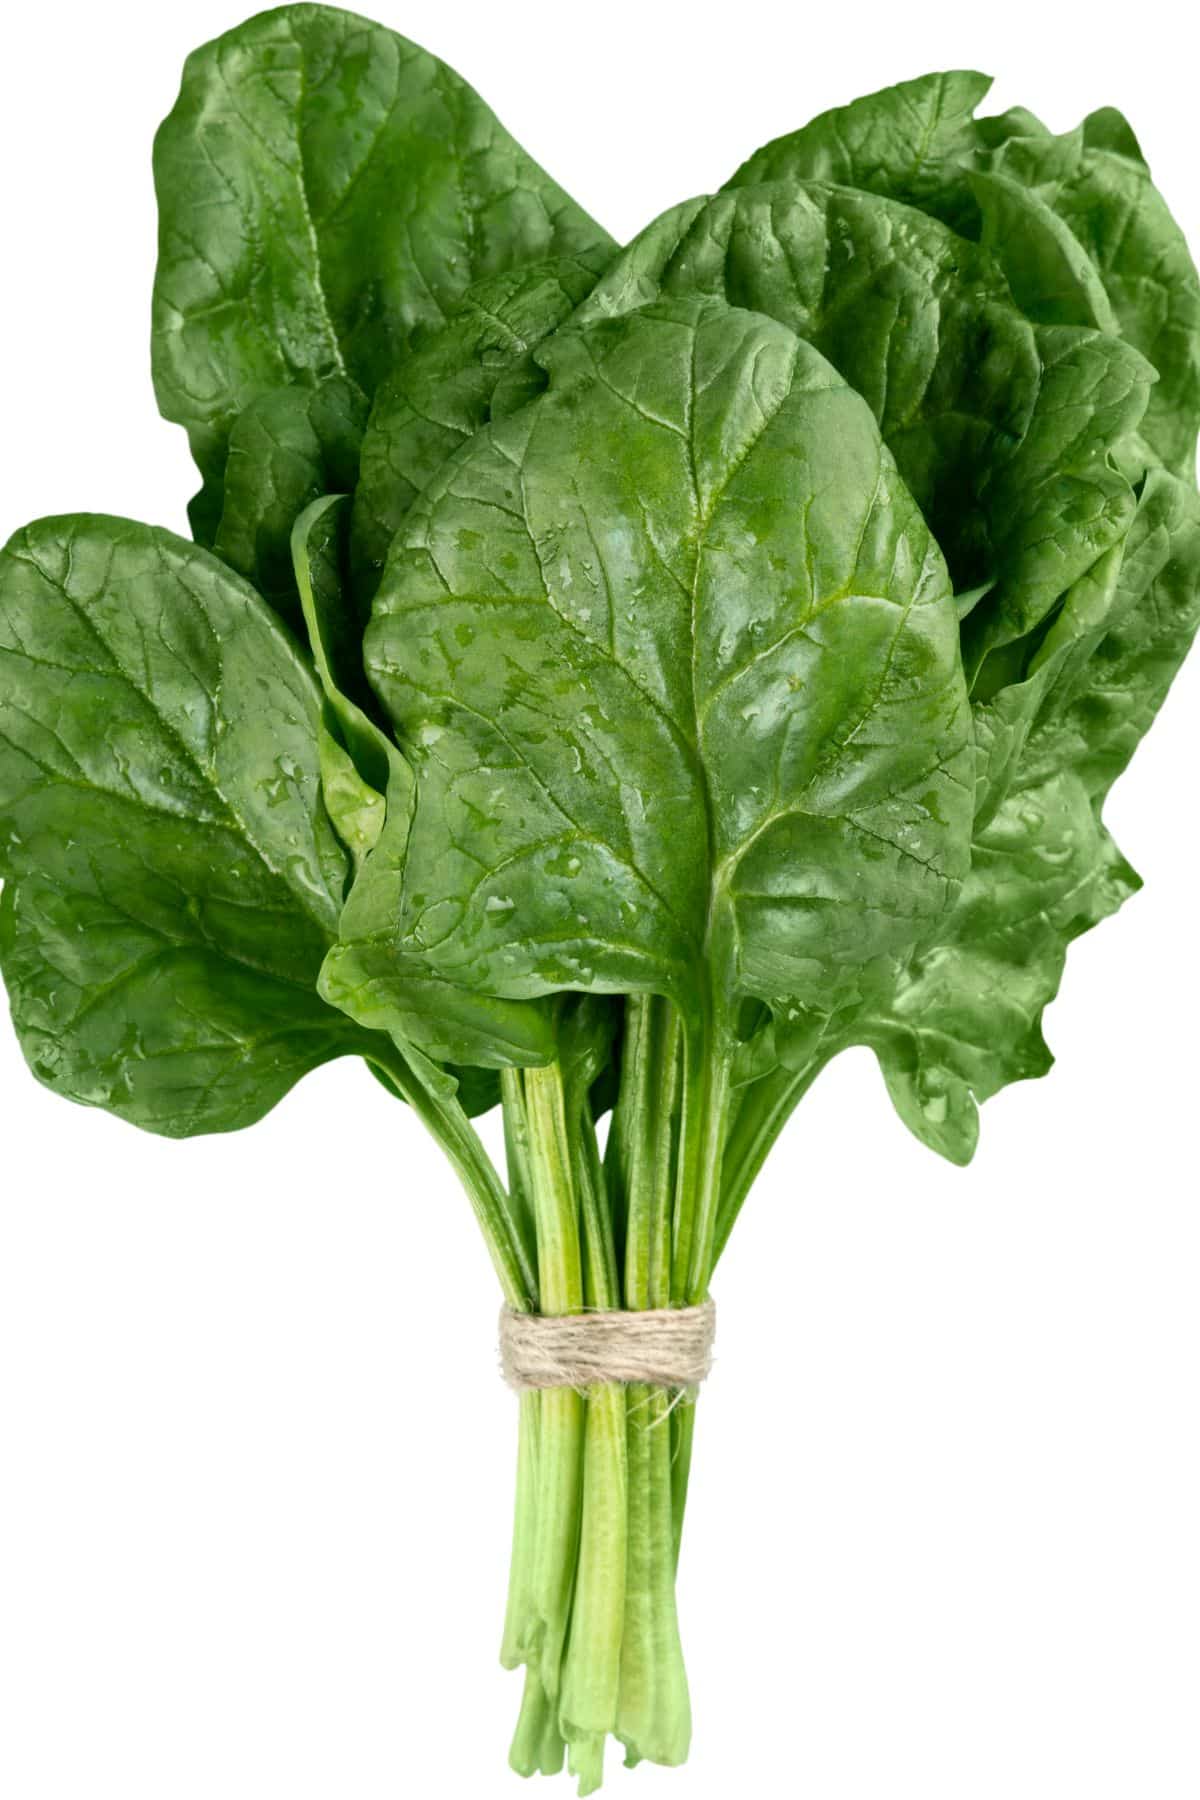 photo of spinach on table.